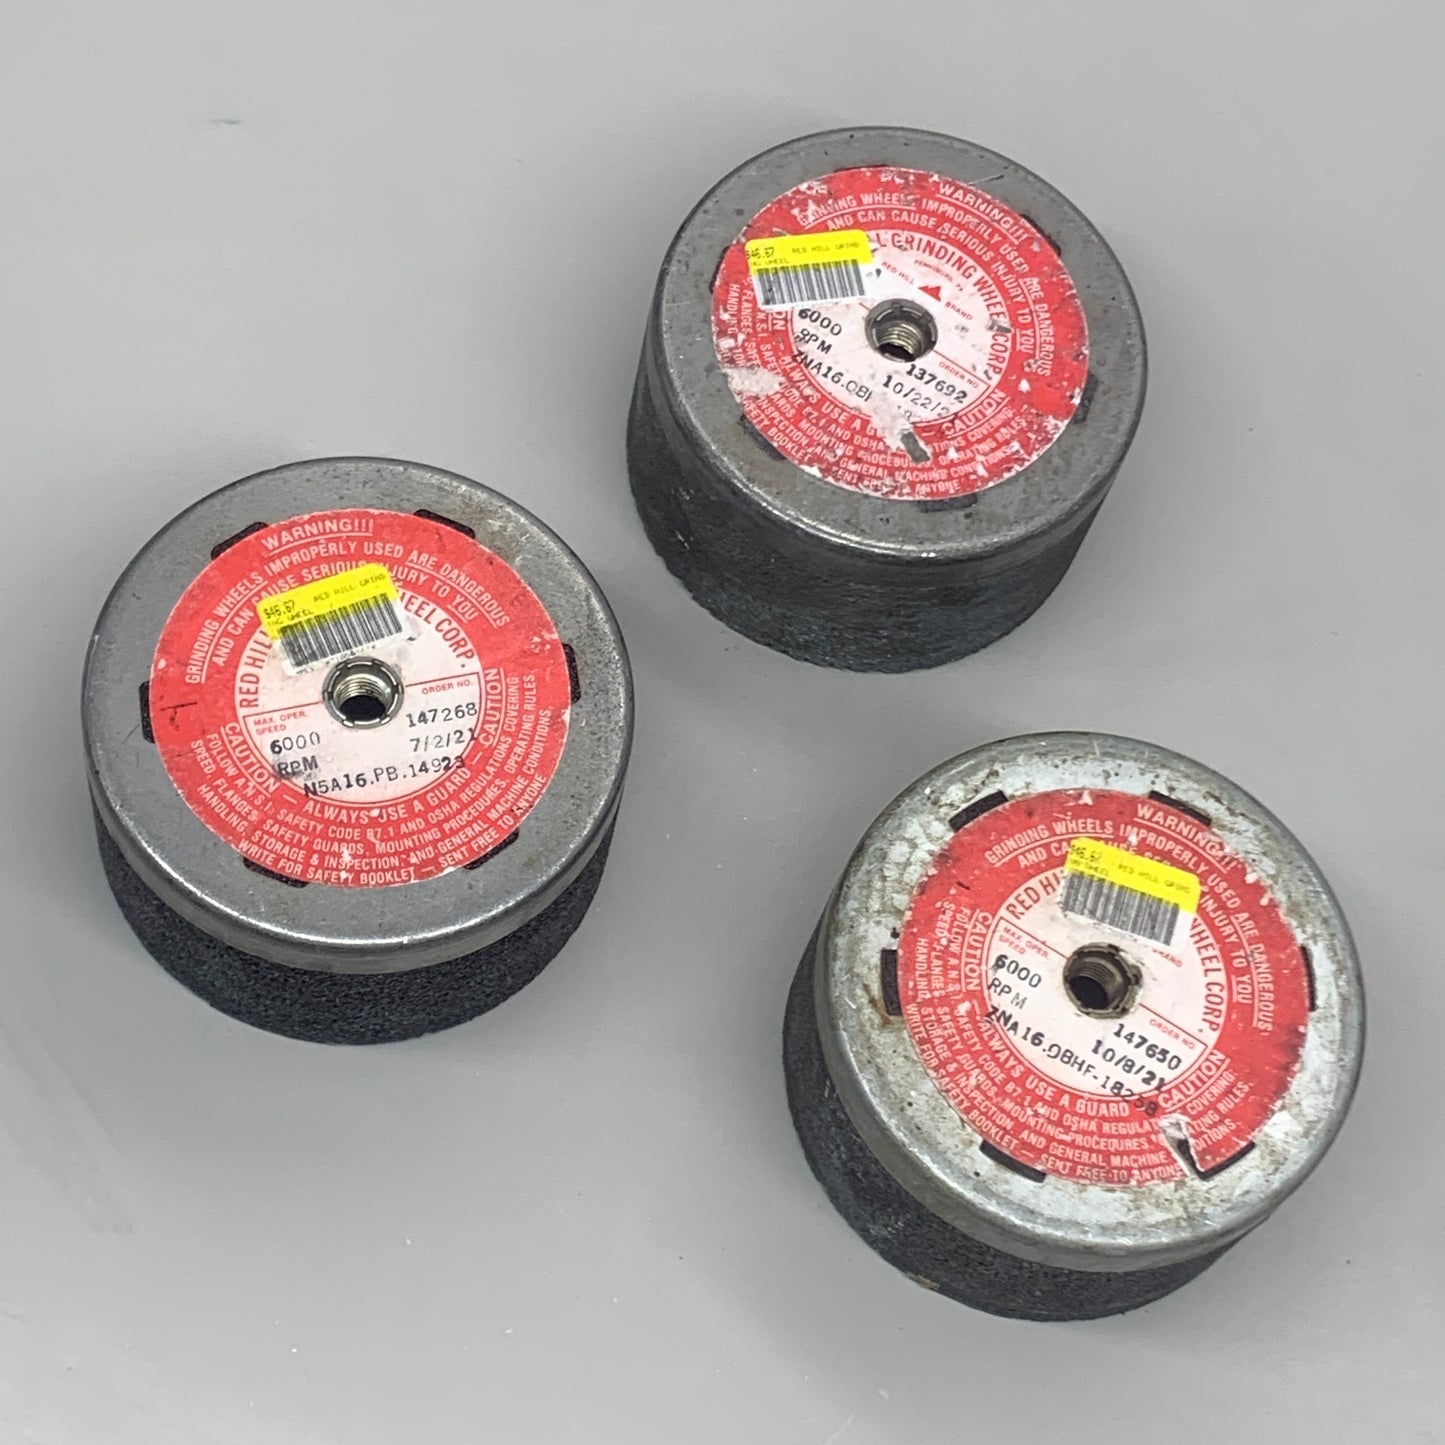 RED HILL (3 PACK) Grinding Wheel 6000 RPM OBHF 18253 6" Distressed  ZNA16